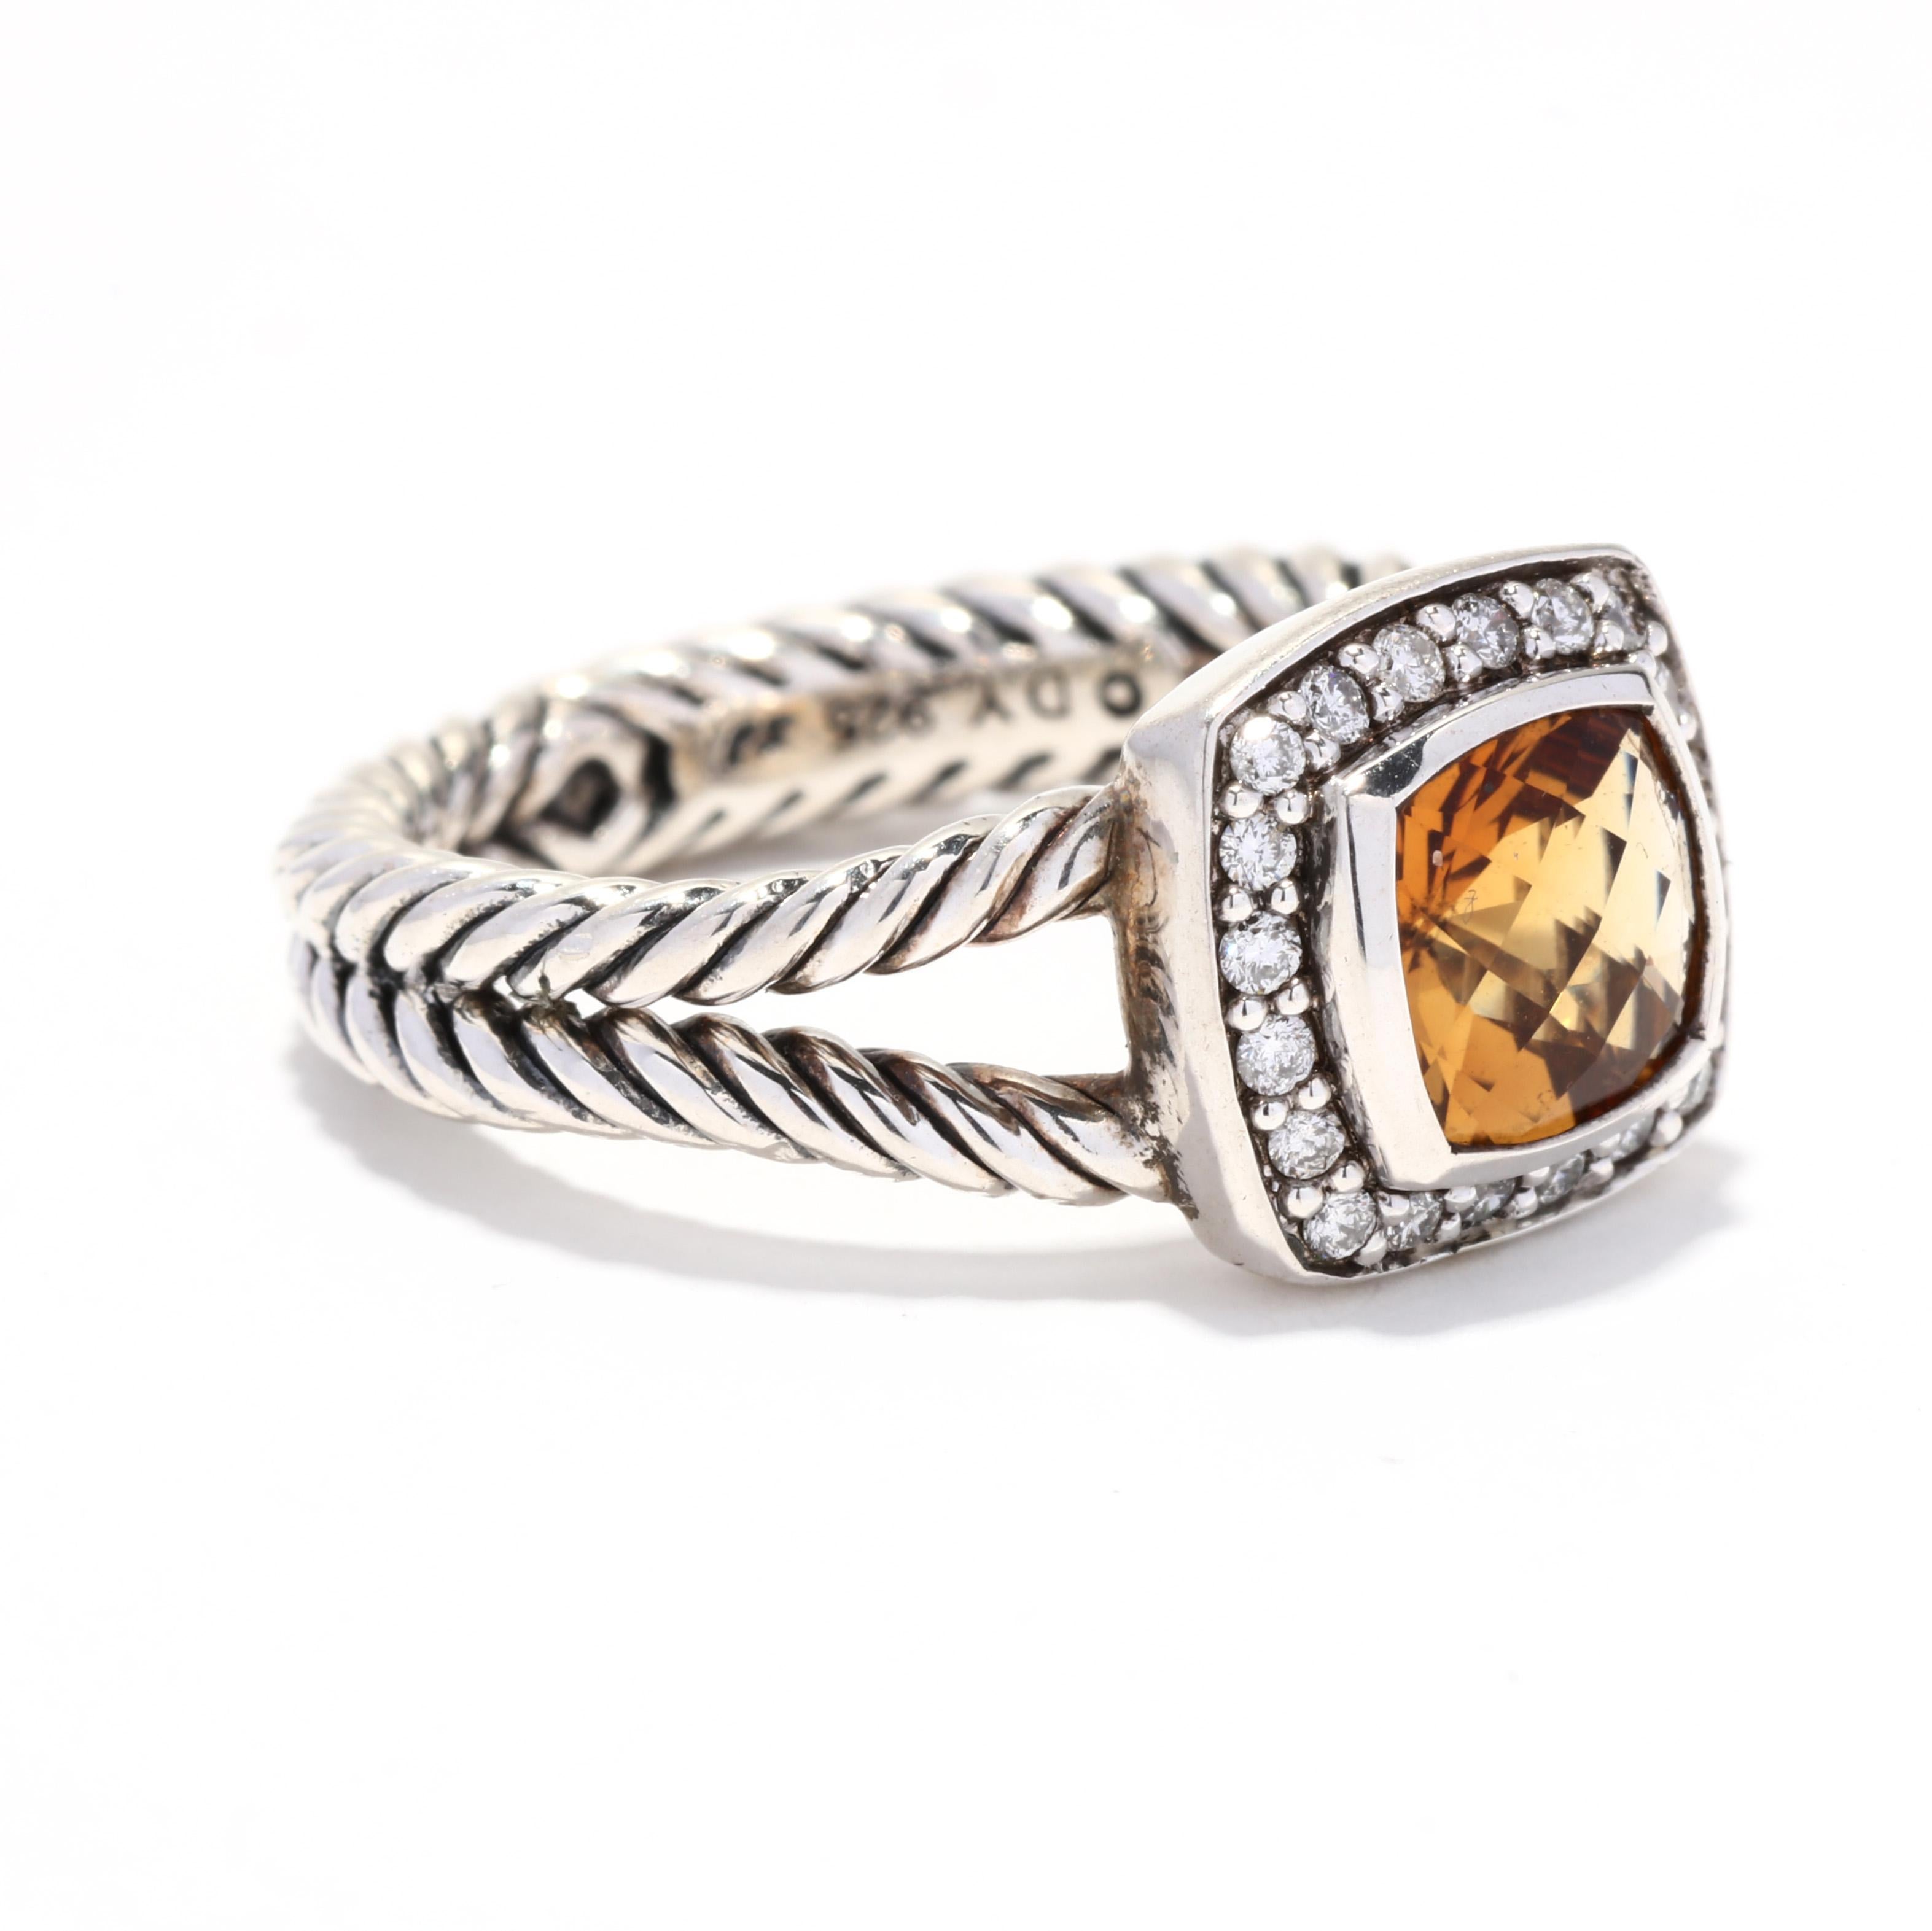 A vintage David Yurman sterling silver citrine and diamond albion ring. This November birthstone ring features a bezel set, cushion checkerboard citrine weighing approximately 1.45 carats surrounded by a halo of round brilliant cut diamonds weighing